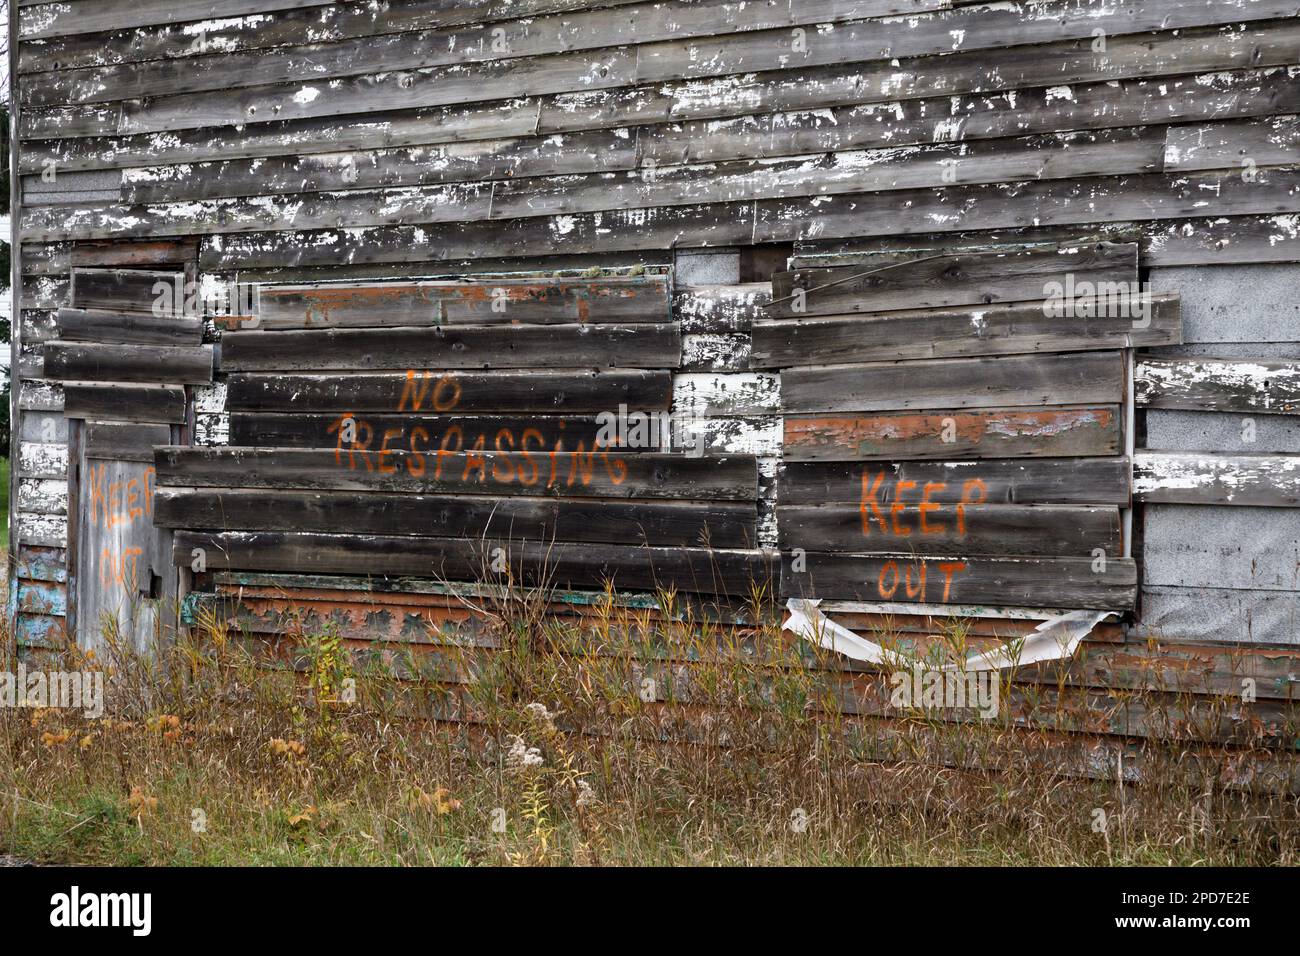 A keep out and no trespassing warning spray painted onto the side of an old weathered wooden building. Stock Photo